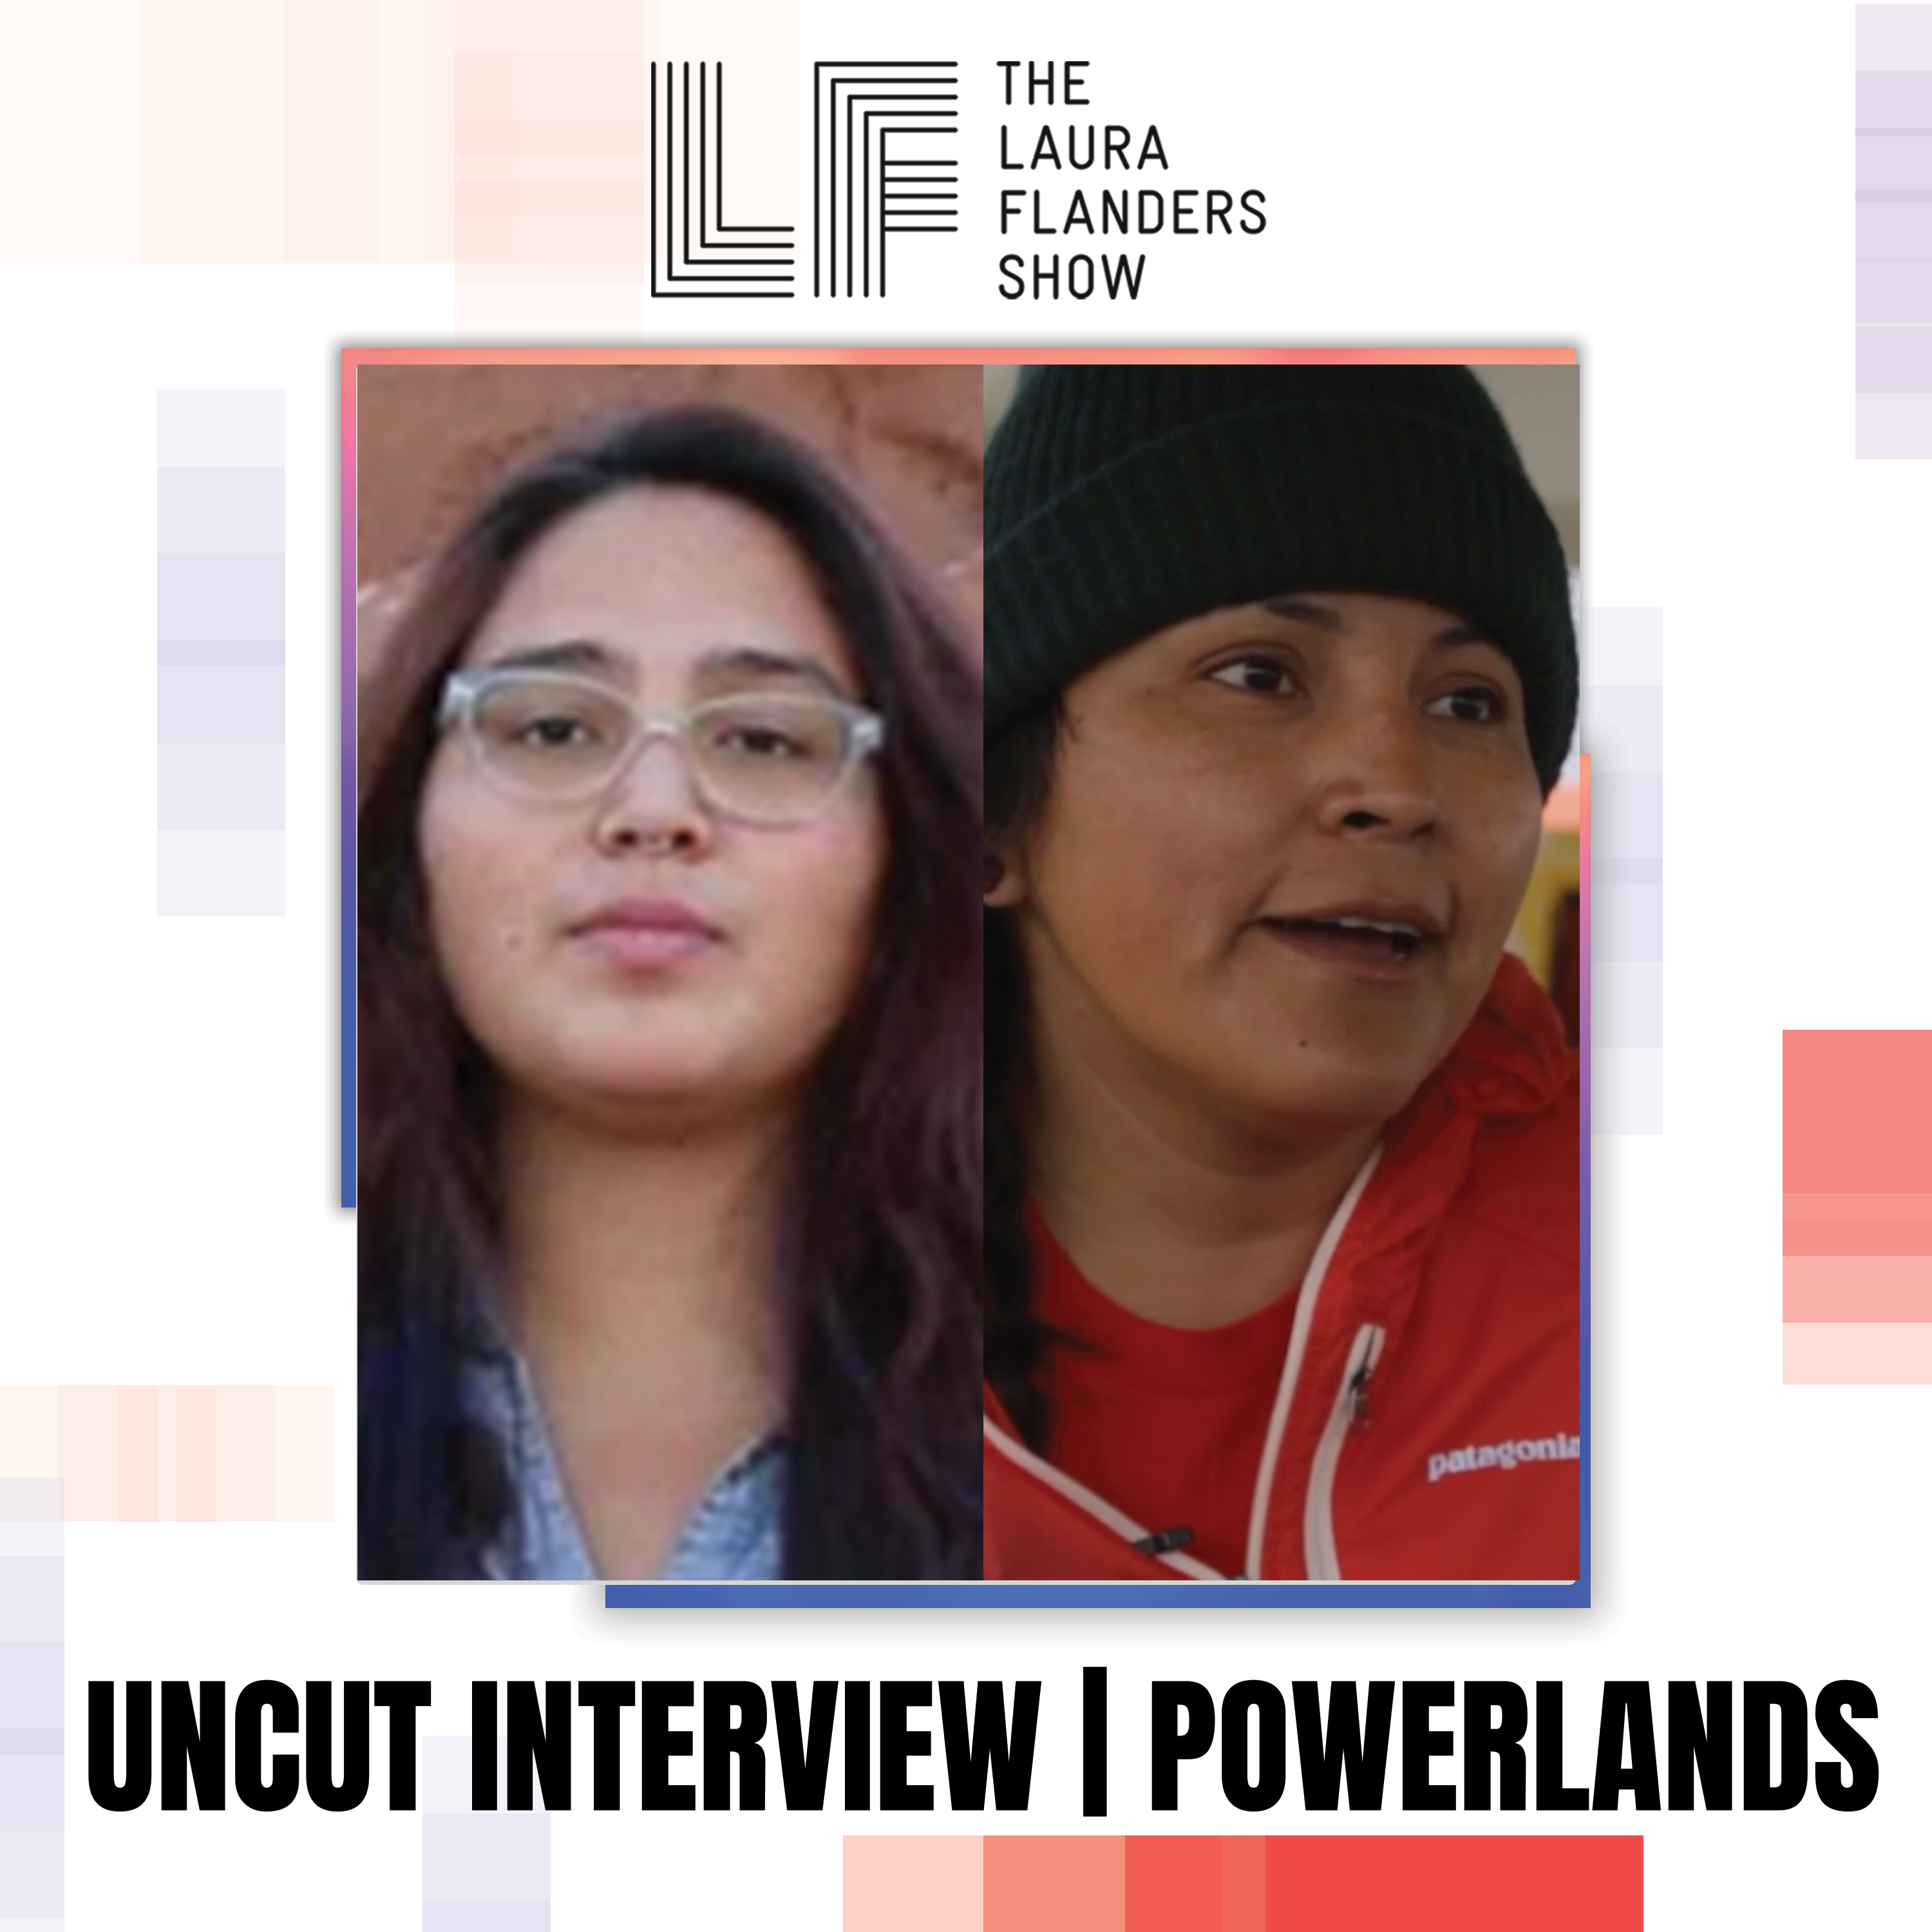 Photo of Ivey-Camille Manybeads Tso and Kim Smith with text: Uncut Interview: Powerlands.